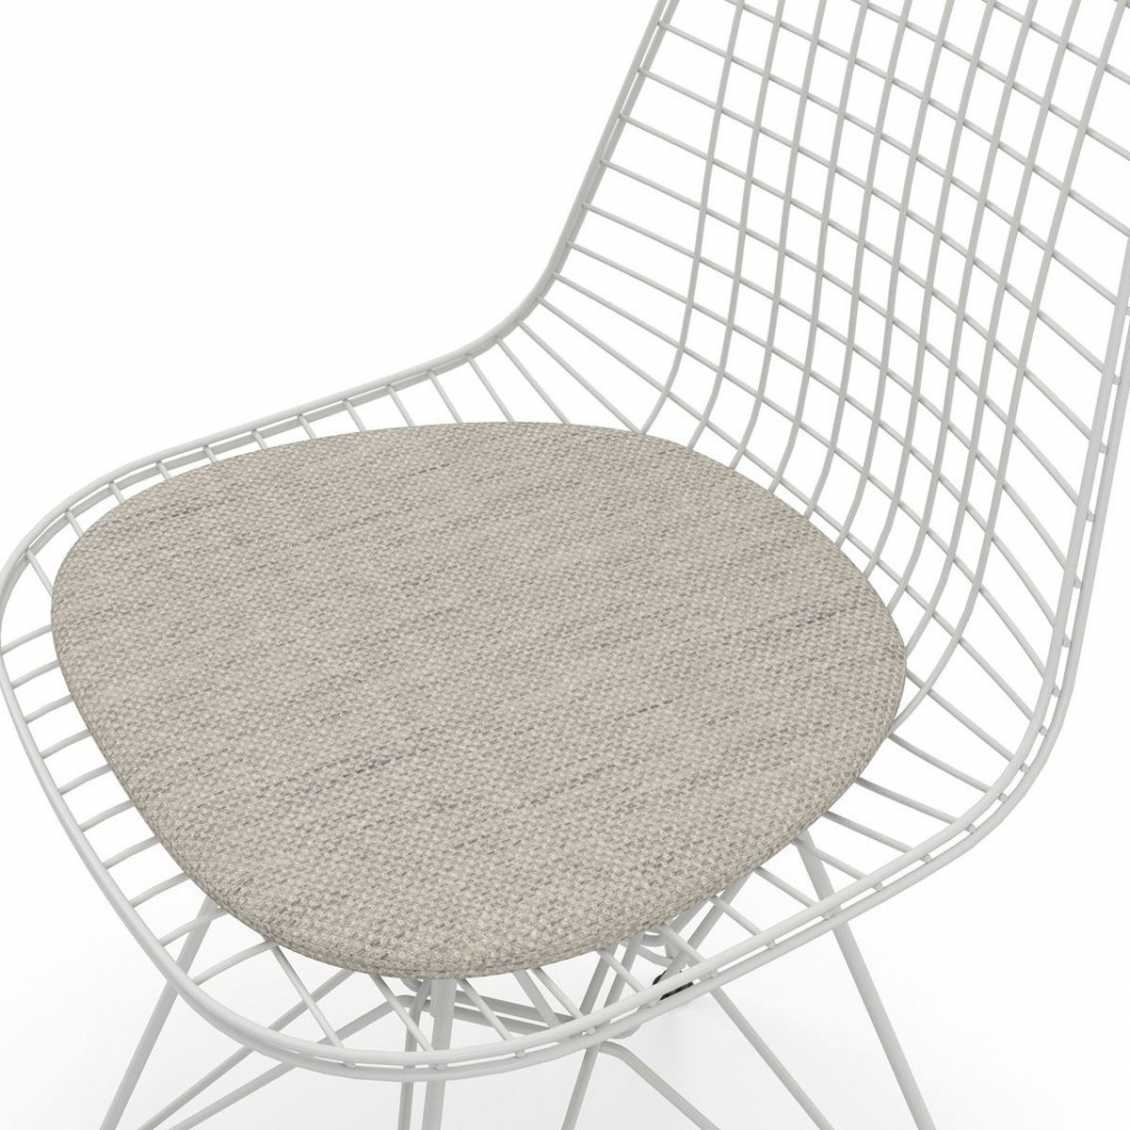 https://www.fundesign.nl/media/catalog/product/6/1/6185964_soft-seats-type-b-eames-wire-chair_v_fullbleed_1440x_2.jpg